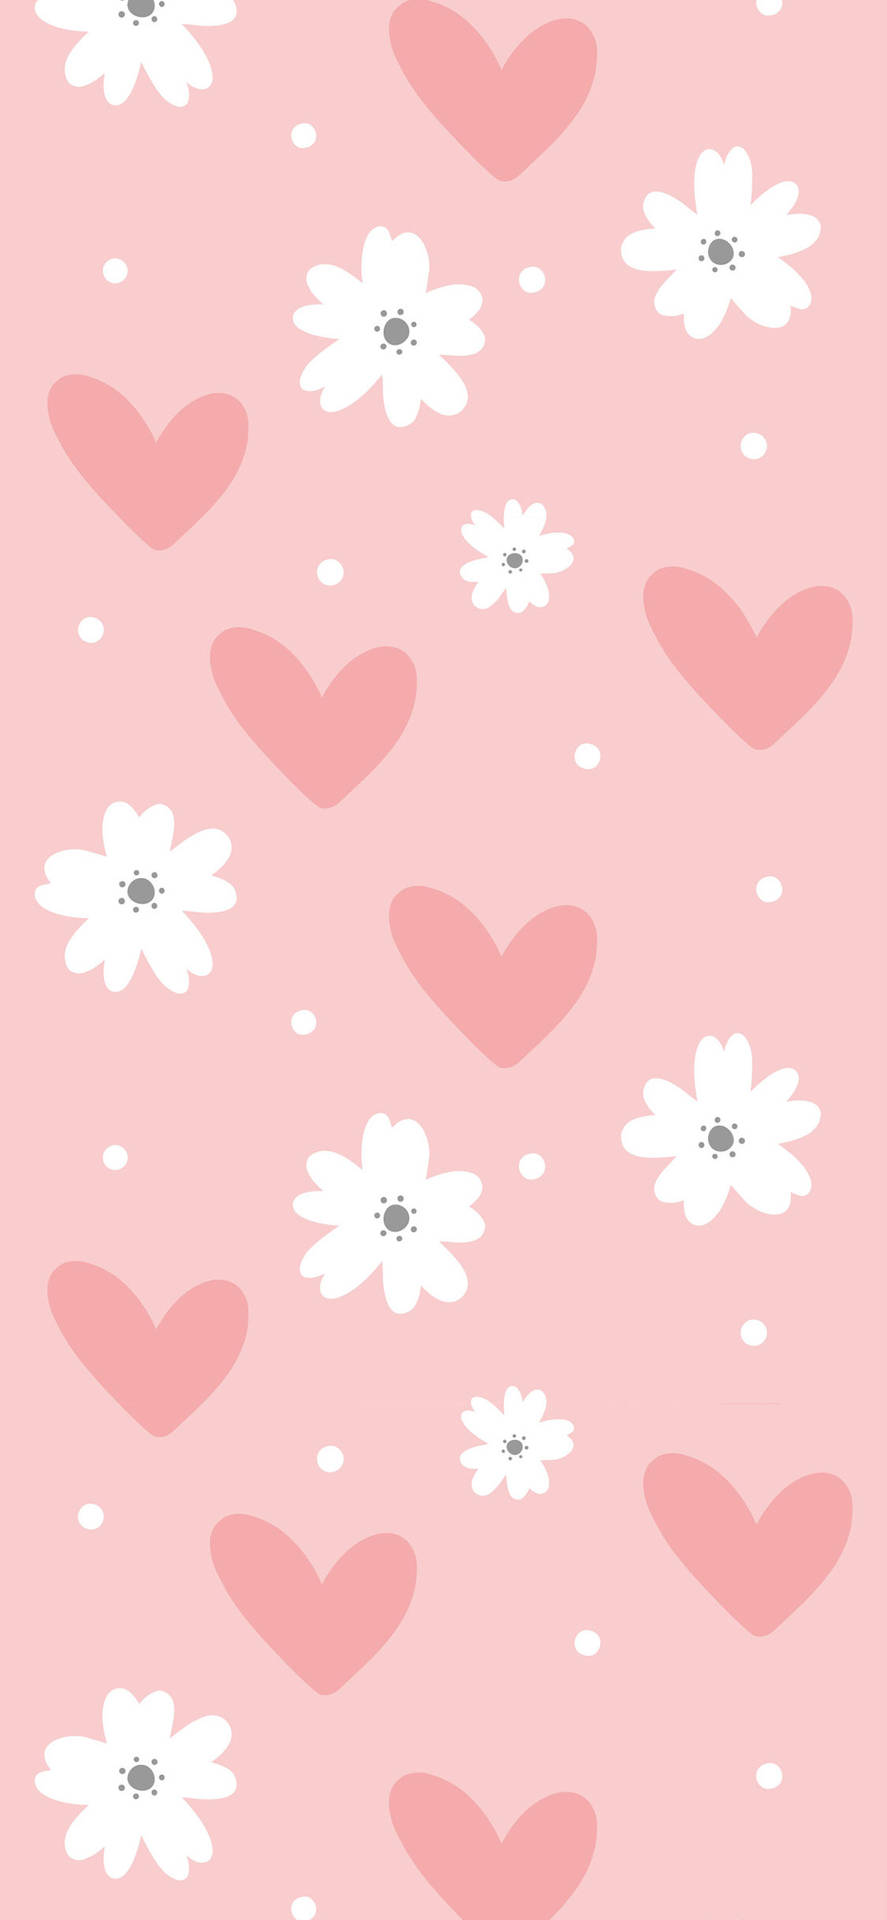 Hearts And Flowers Girly Iphone Background